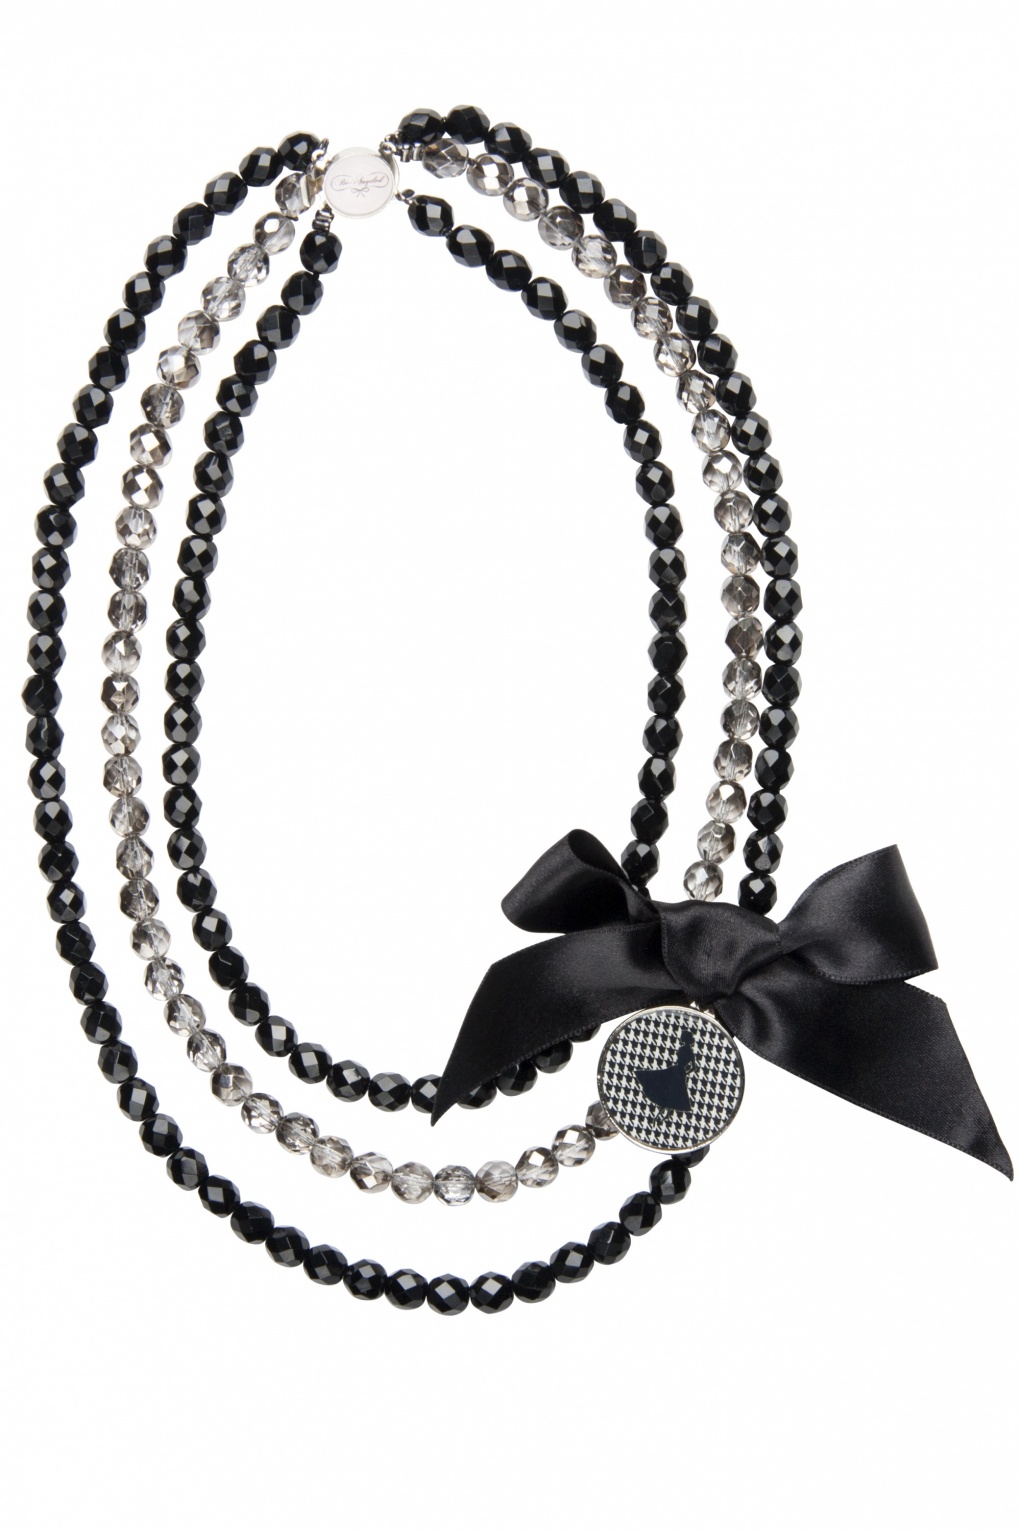 La Parisienne ~ Black and Silver Bow Necklace with faceted fire p